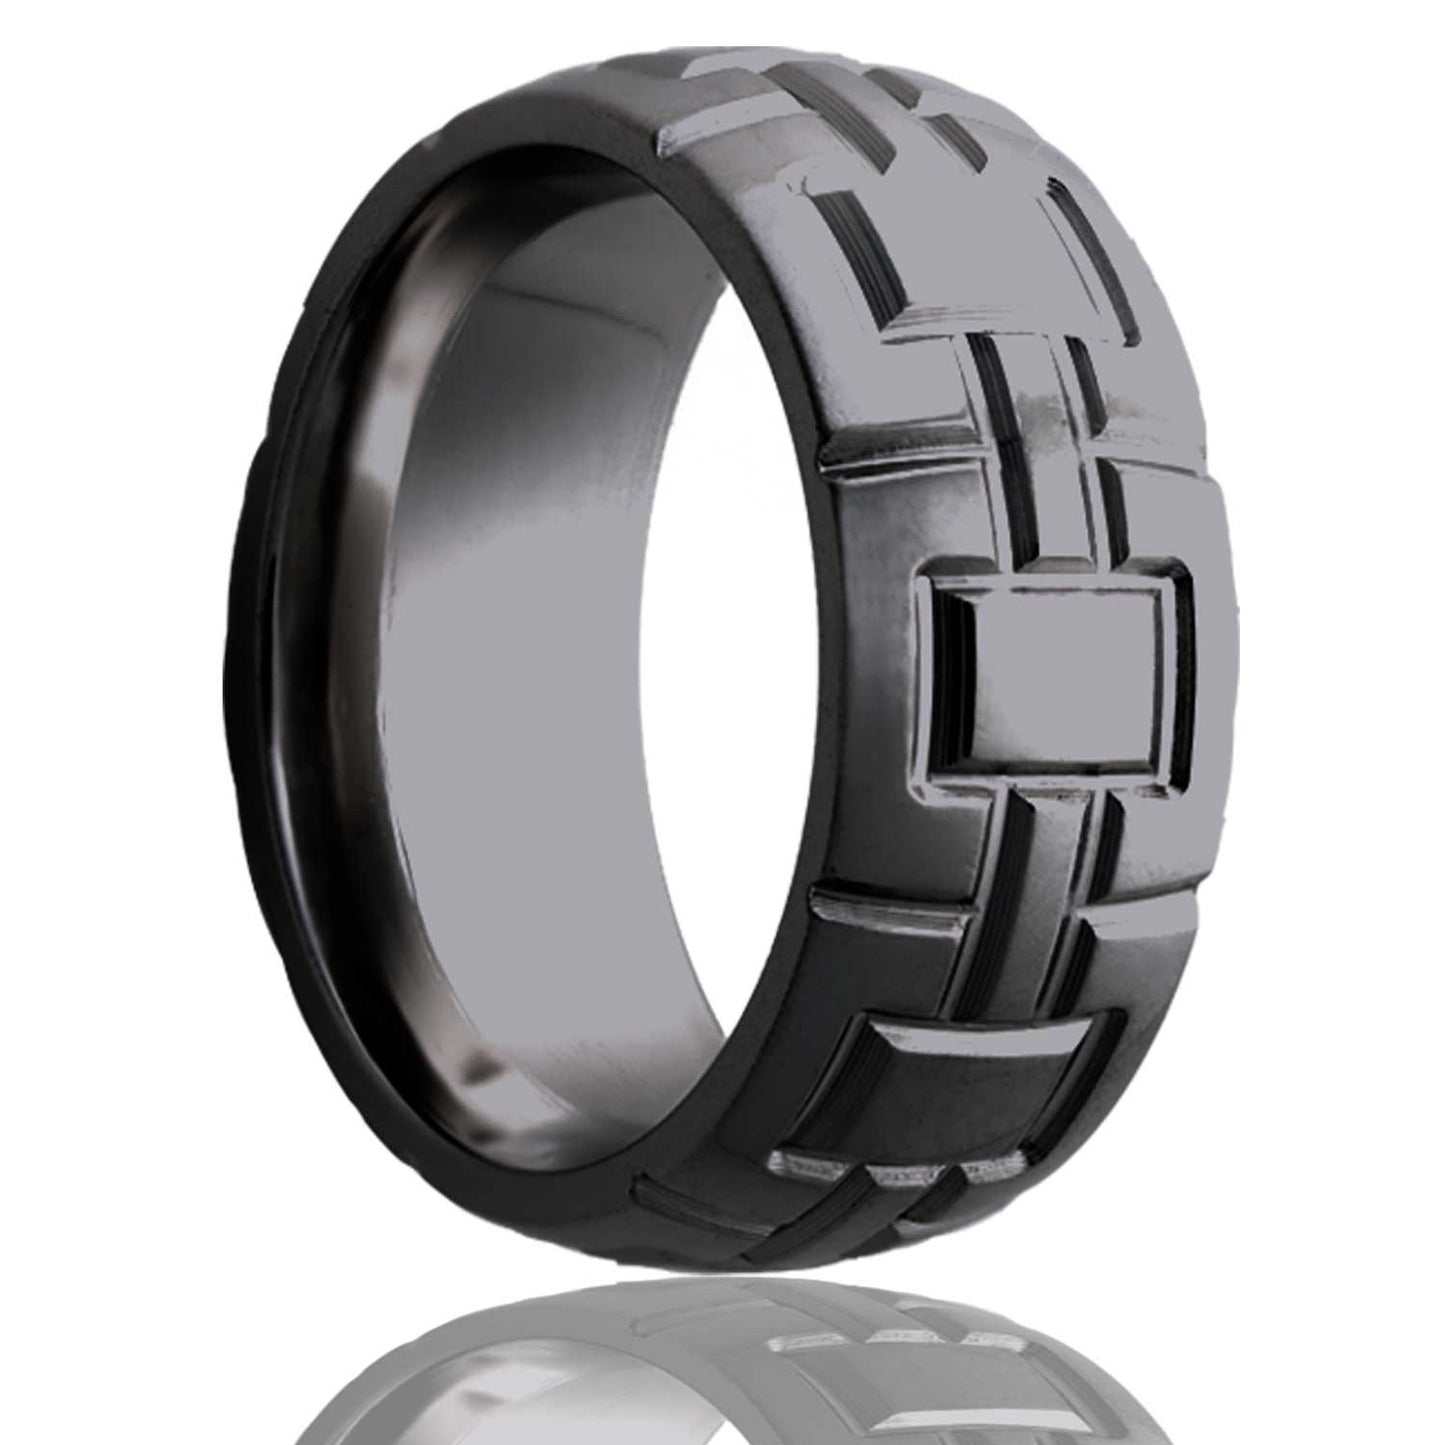 A geometric cube pattern domed zirconium men's wedding band displayed on a neutral white background.